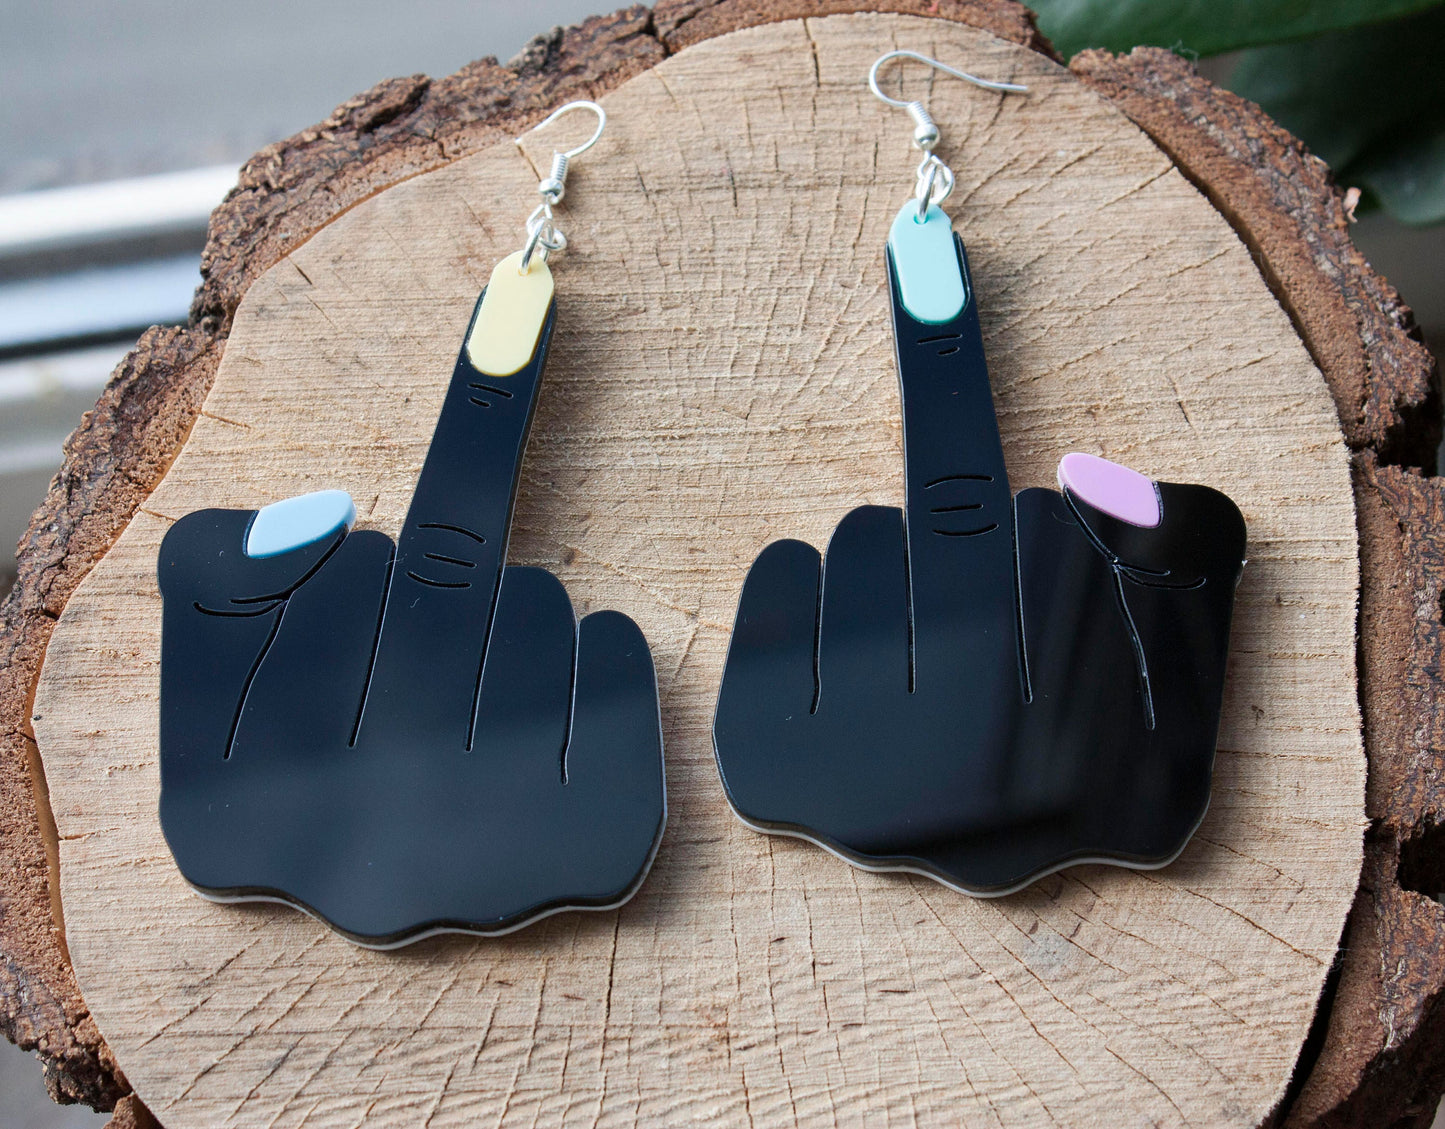 Large Middle finger earrings in 4 colours